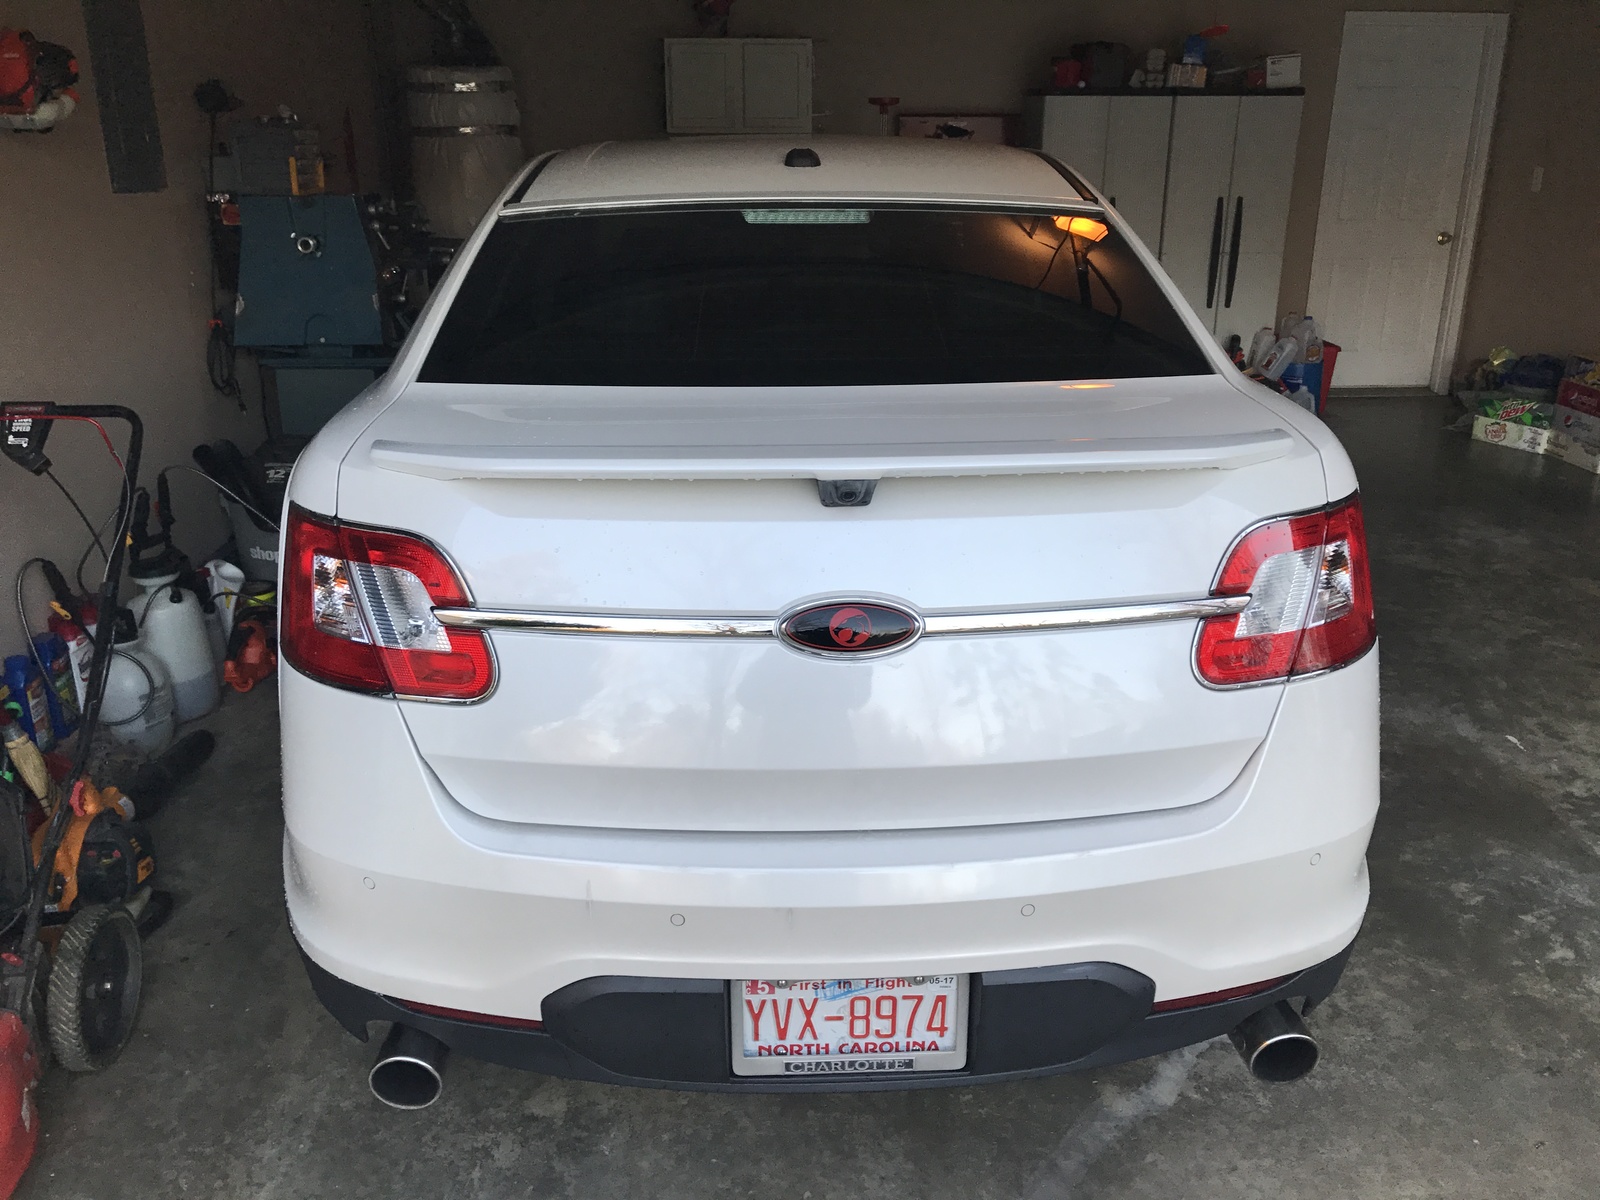 2010 White Ford Taurus SHO picture, mods, upgrades